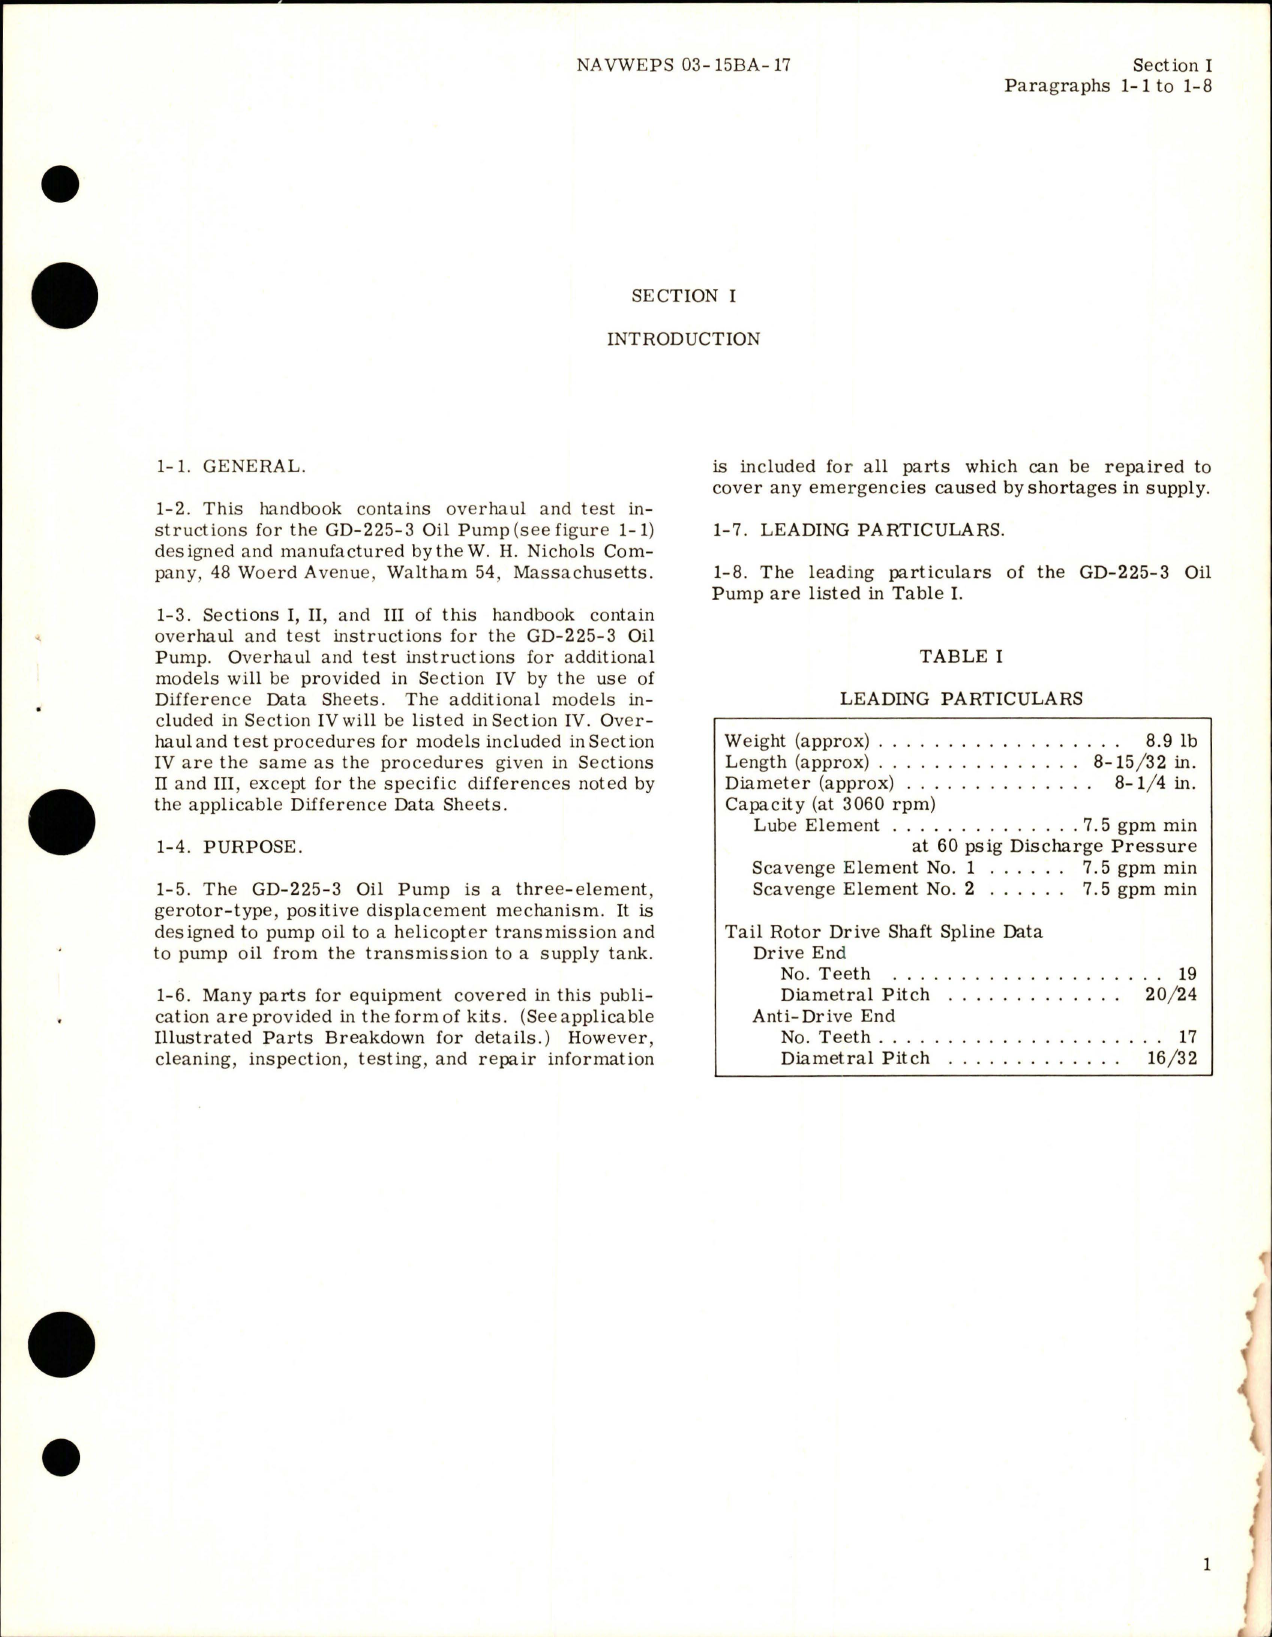 Sample page 5 from AirCorps Library document: Overhaul Instructions for Oil Pump - Part GD-225-3